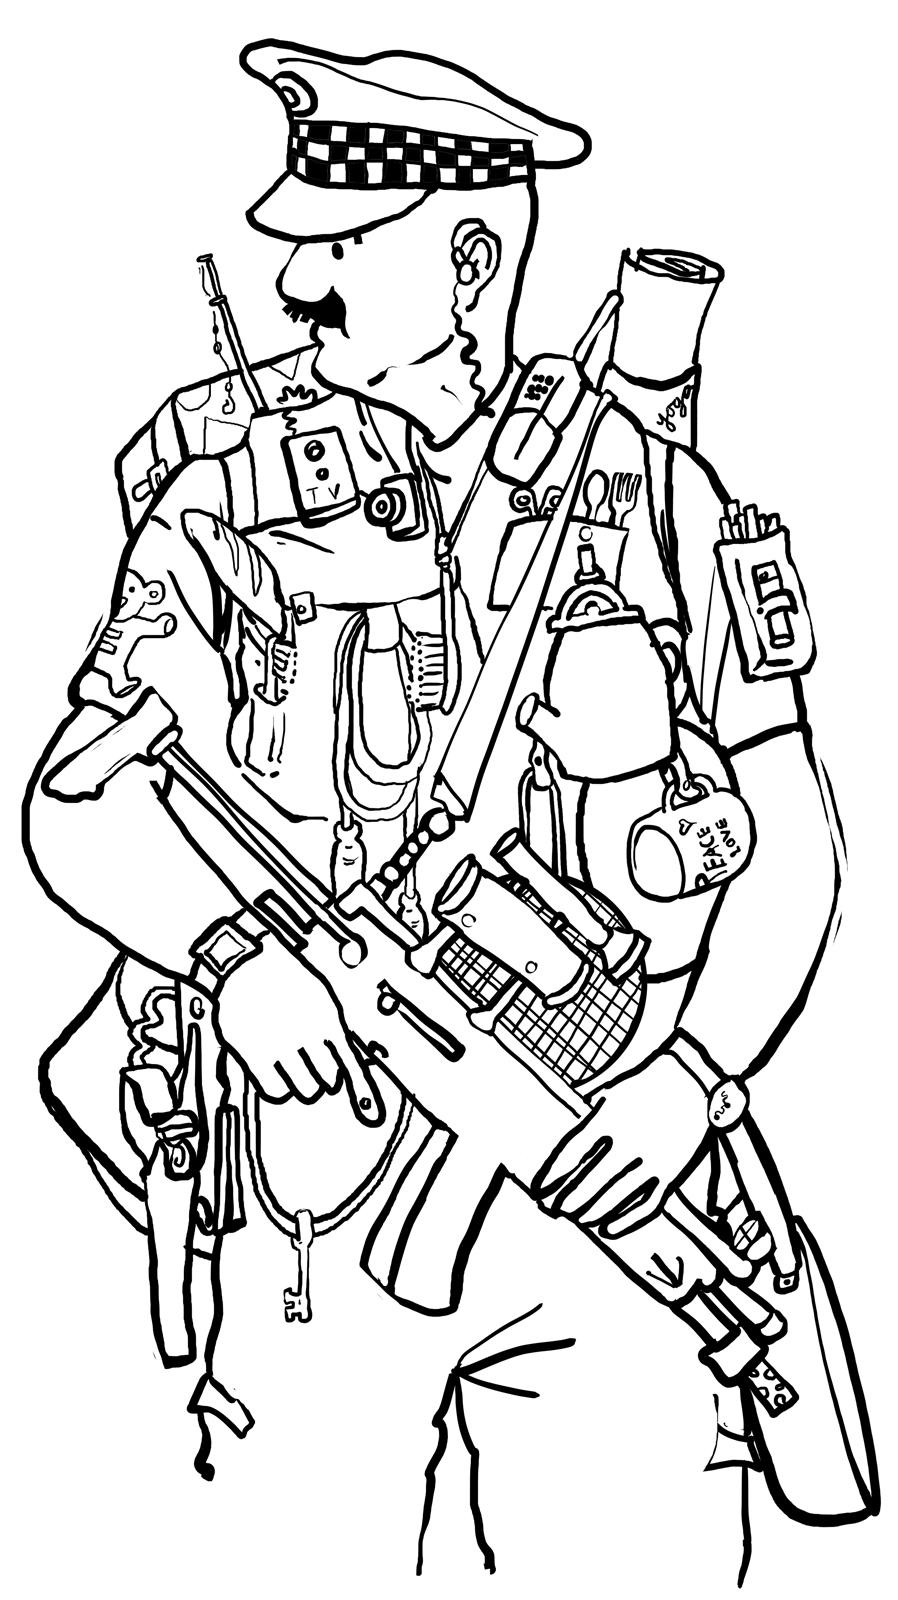 Free Kids Police Officer Coloring Pages - Coloring Home